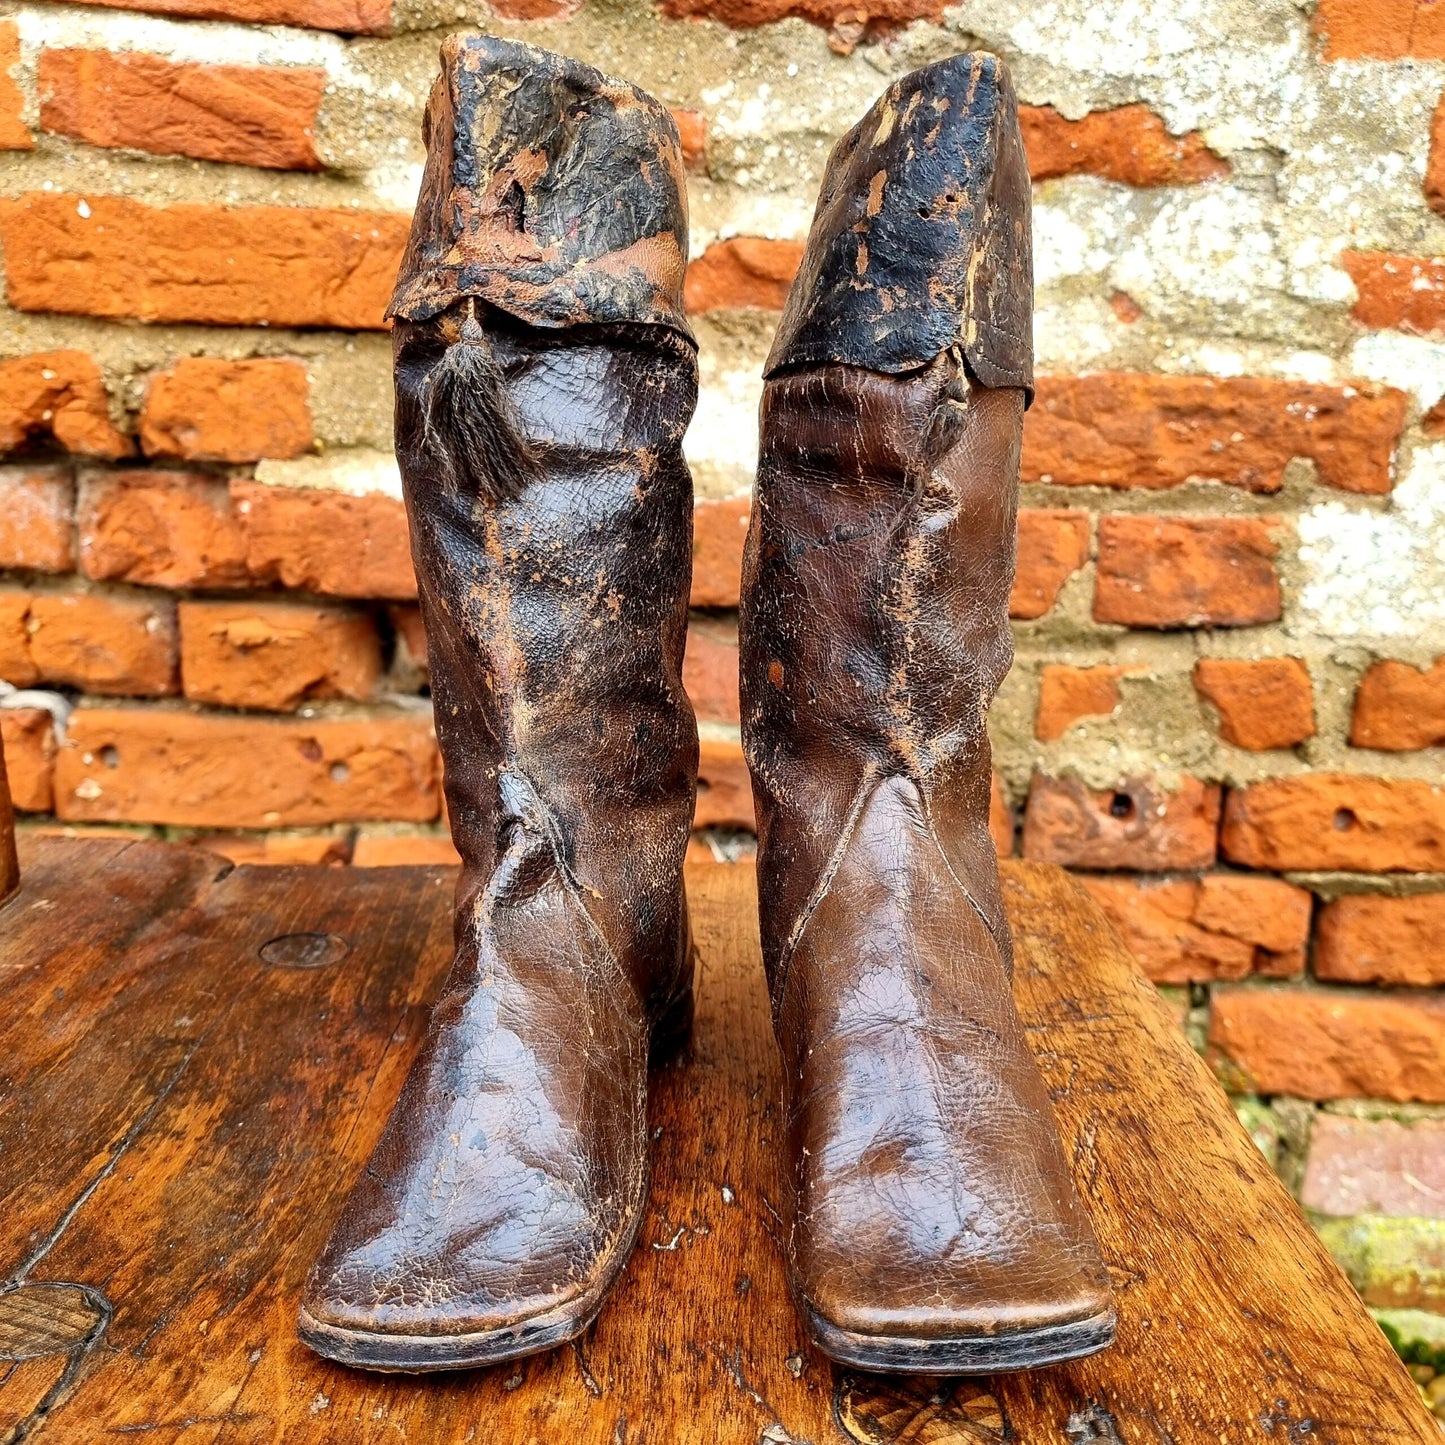 Rare Pair of Late 18th Century / Early 19th Century English Antique Child's Leather Boots